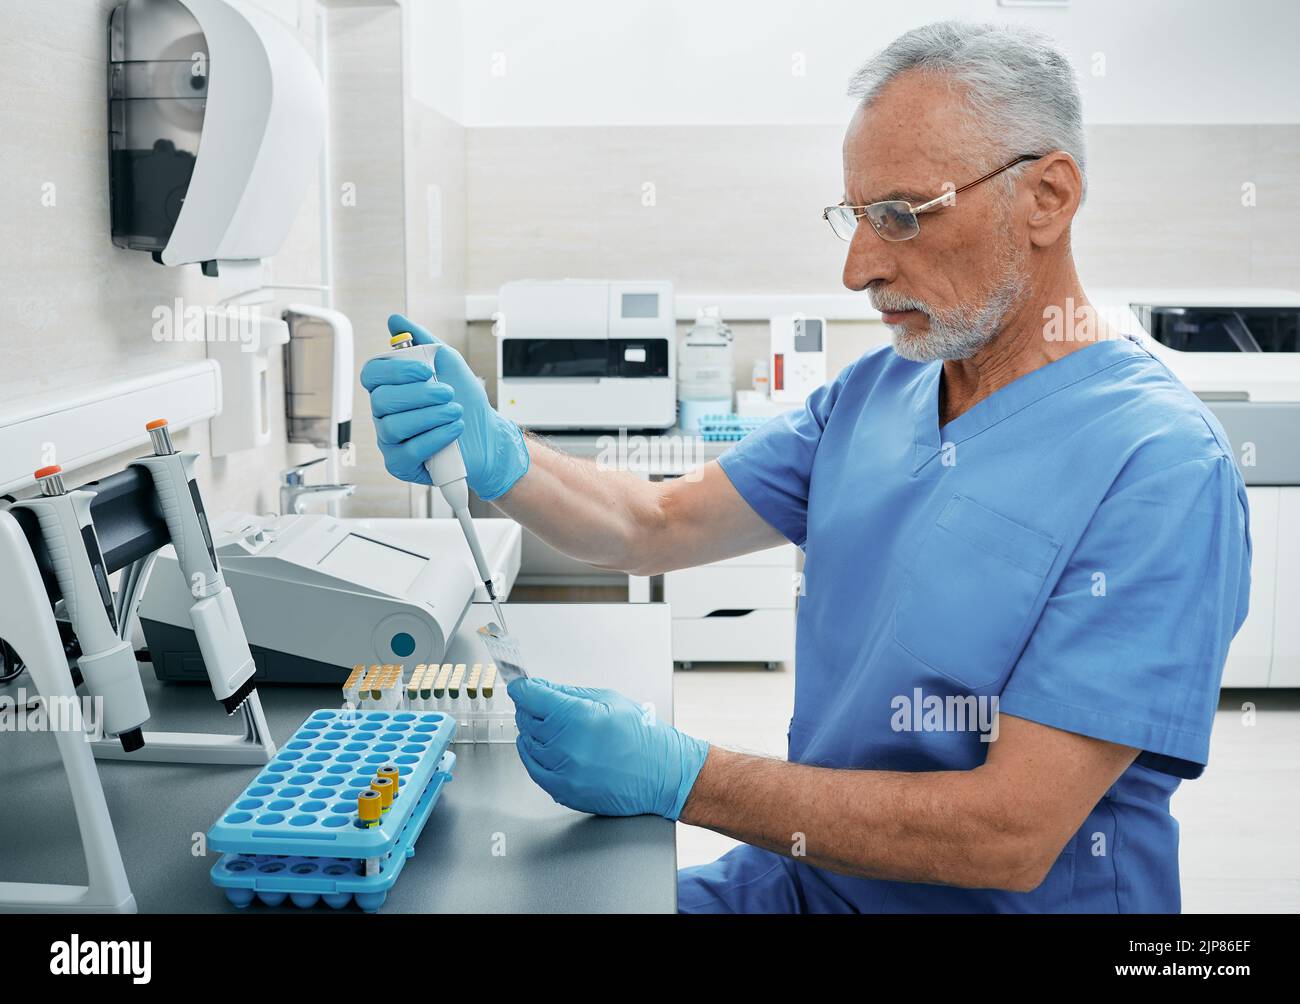 Mature male scientist with micropipette for test analyzes working at medical research laboratory. Laboratory technician determines person's blood type Stock Photo